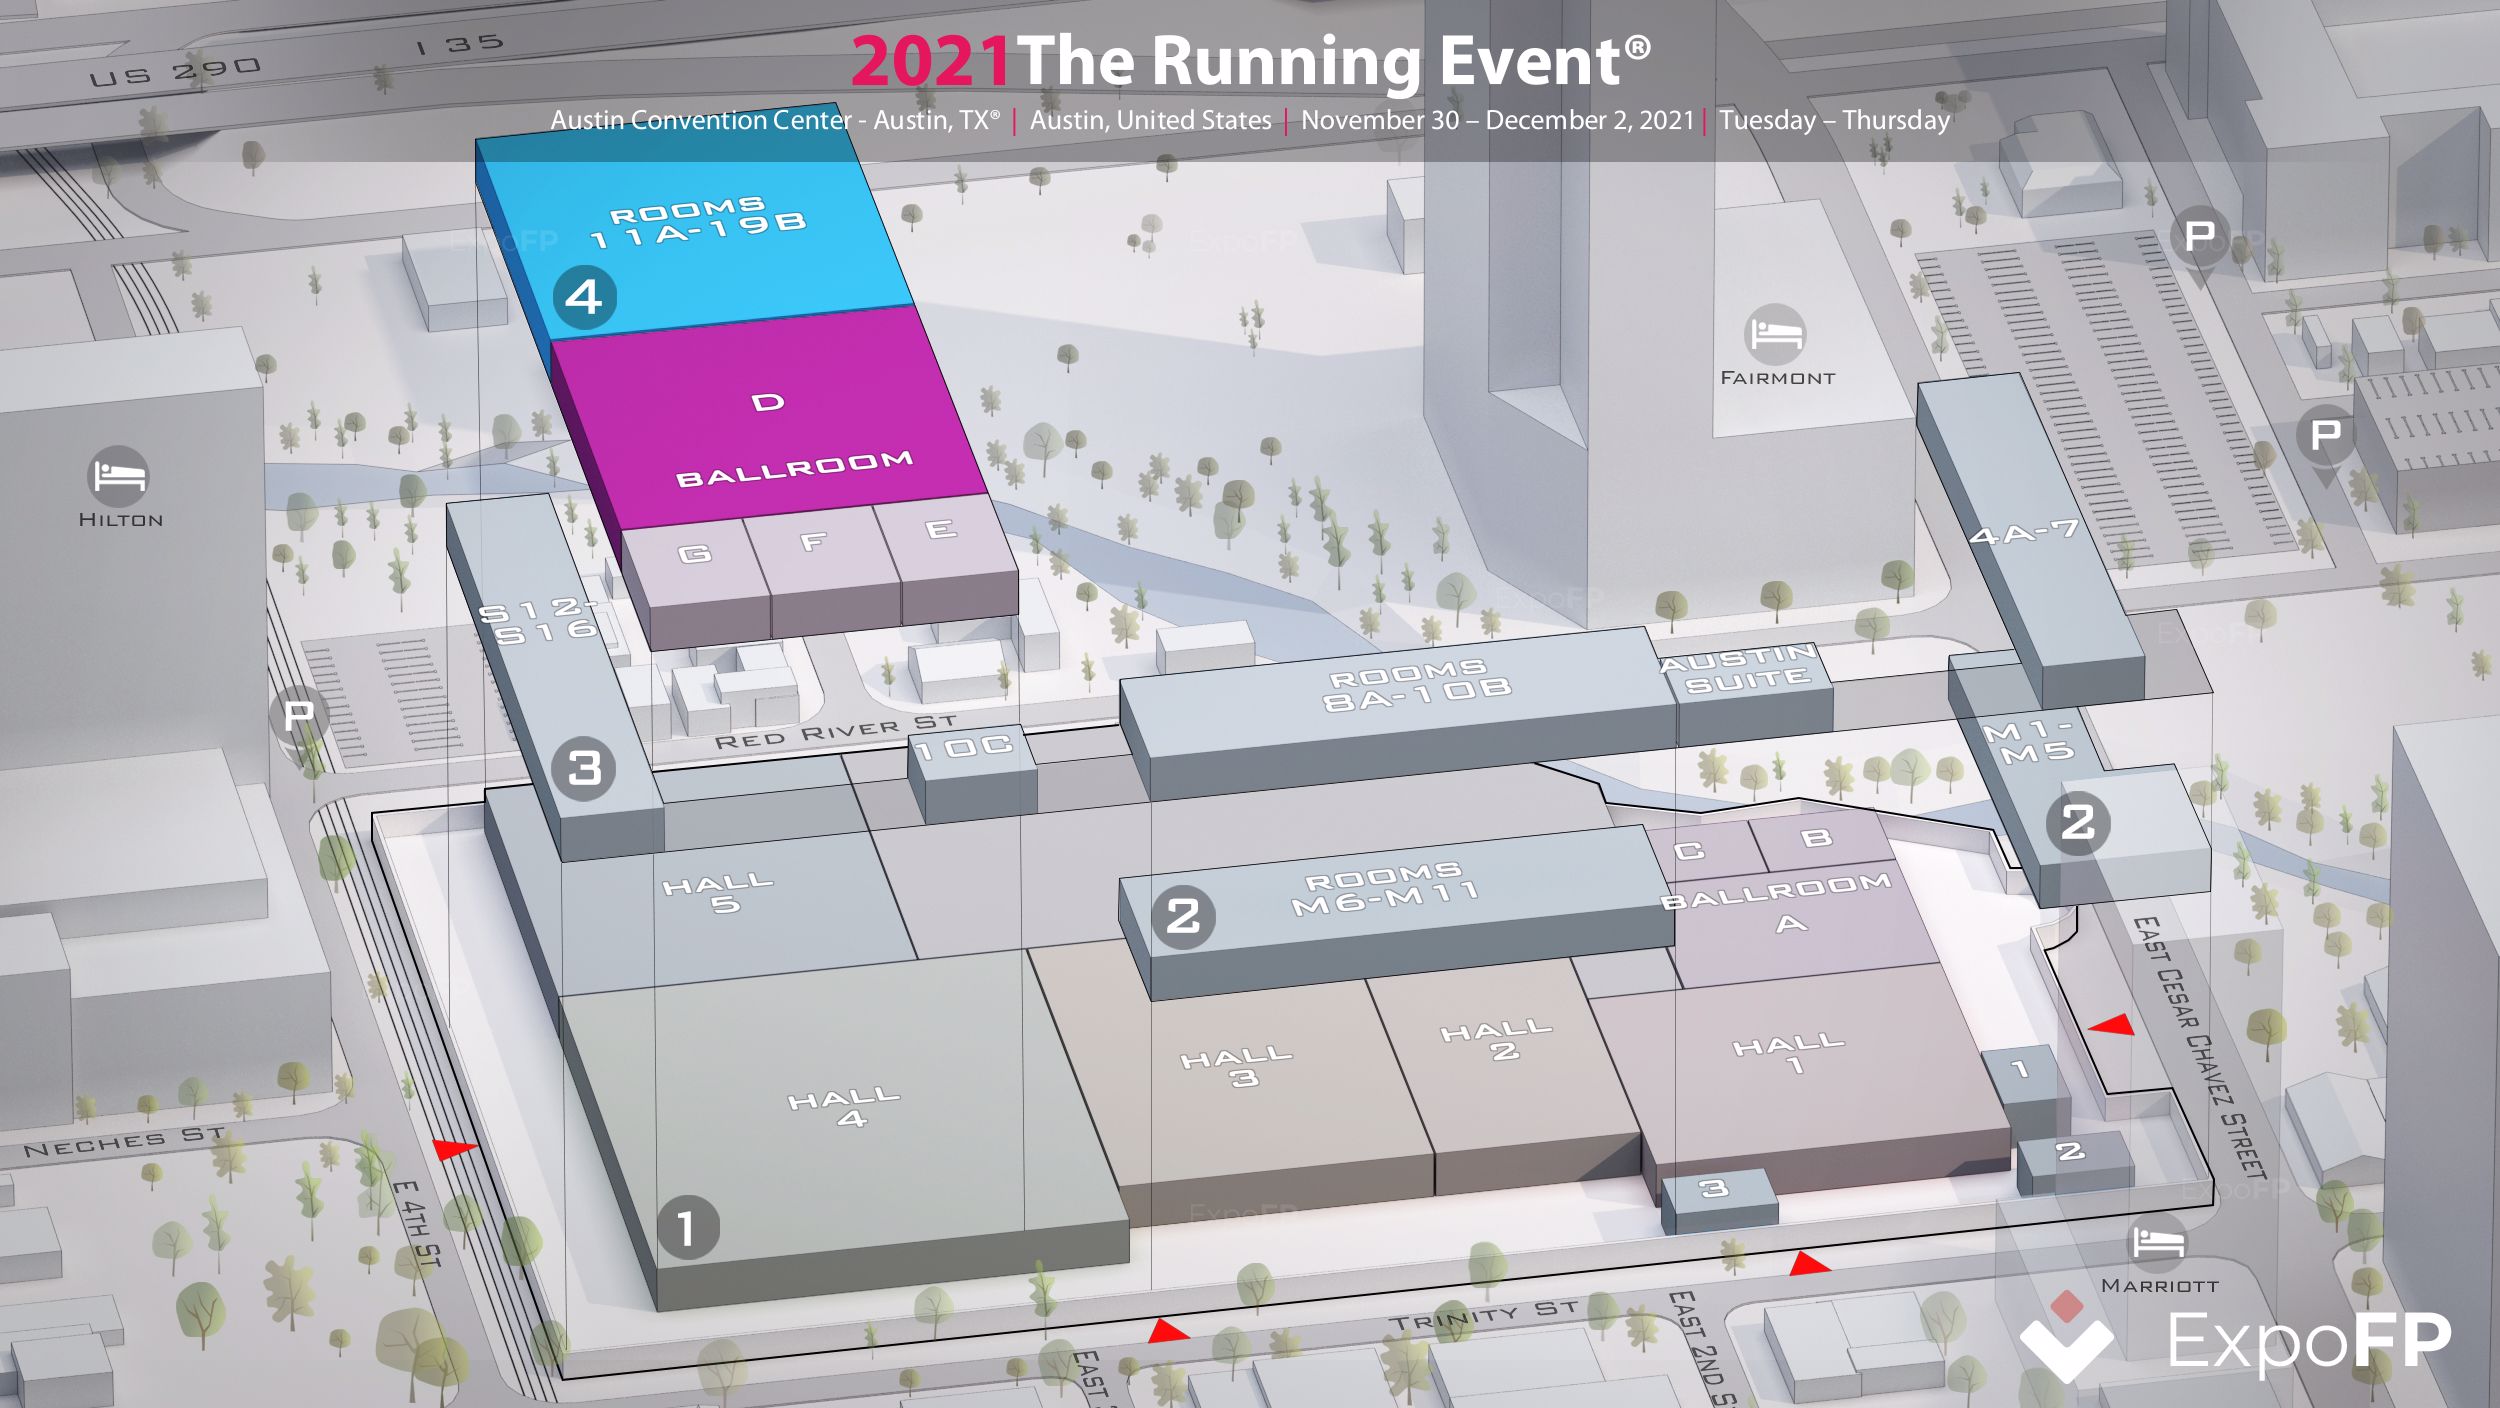 The Running Event 2021 in Austin Convention Center